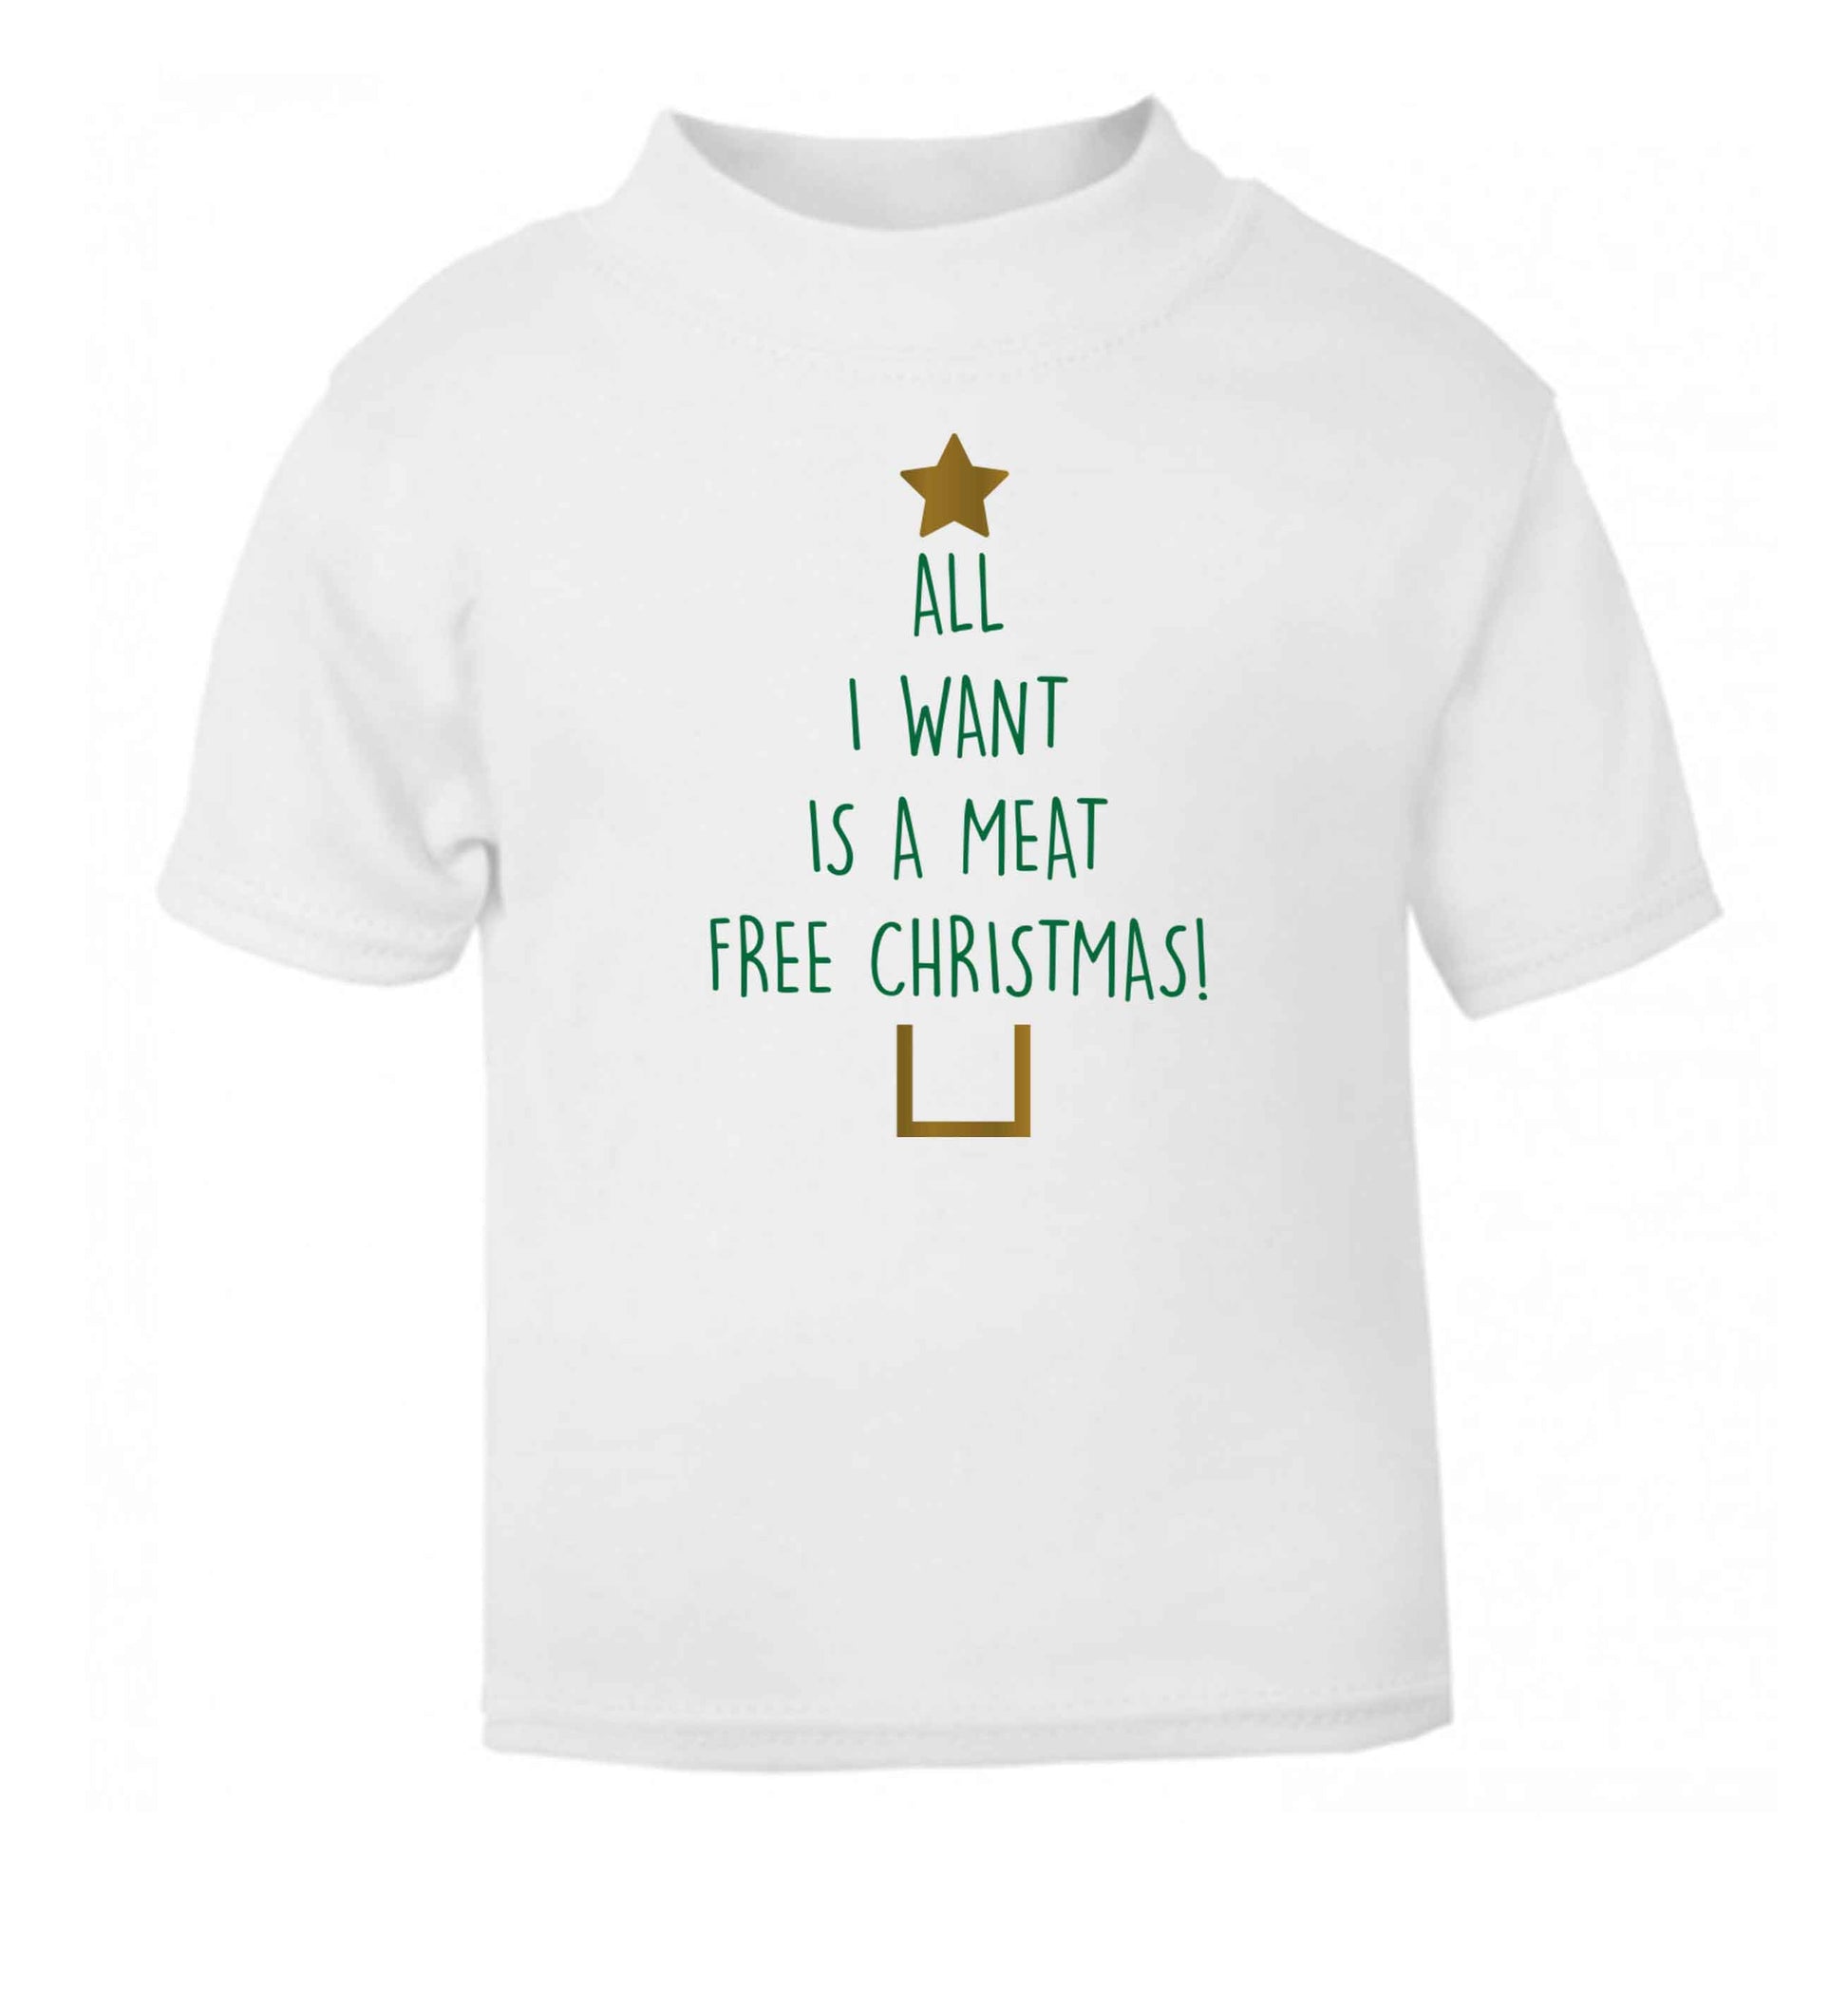 All I want is a meat free Christmas white Baby Toddler Tshirt 2 Years